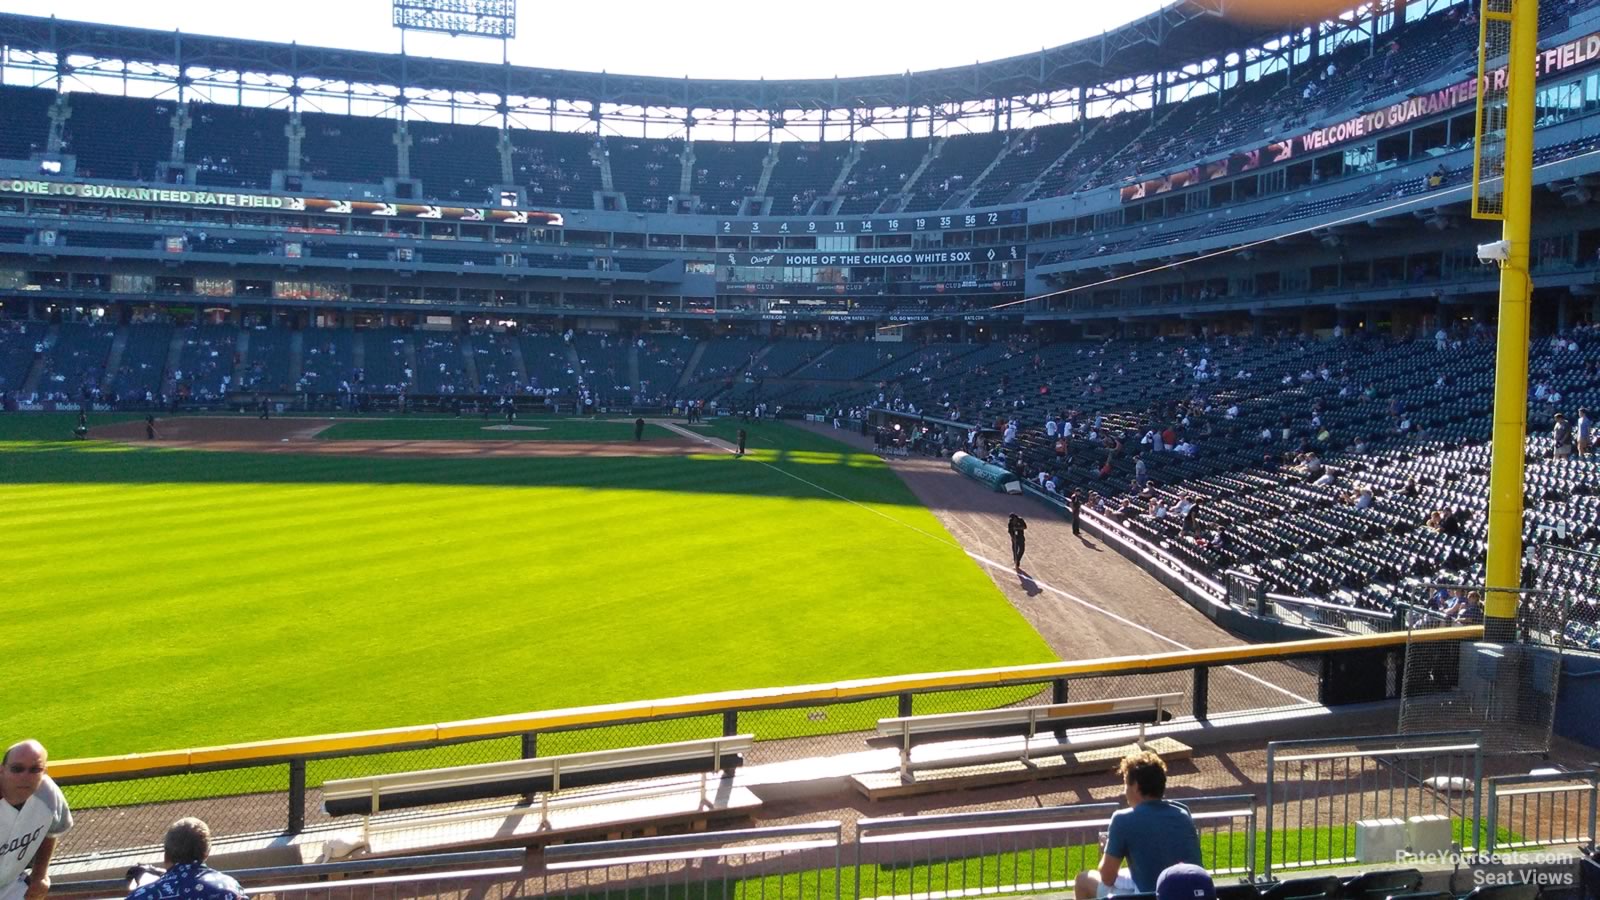 Chicago White Sox Unsigned Guaranteed Rate Field View Photograph